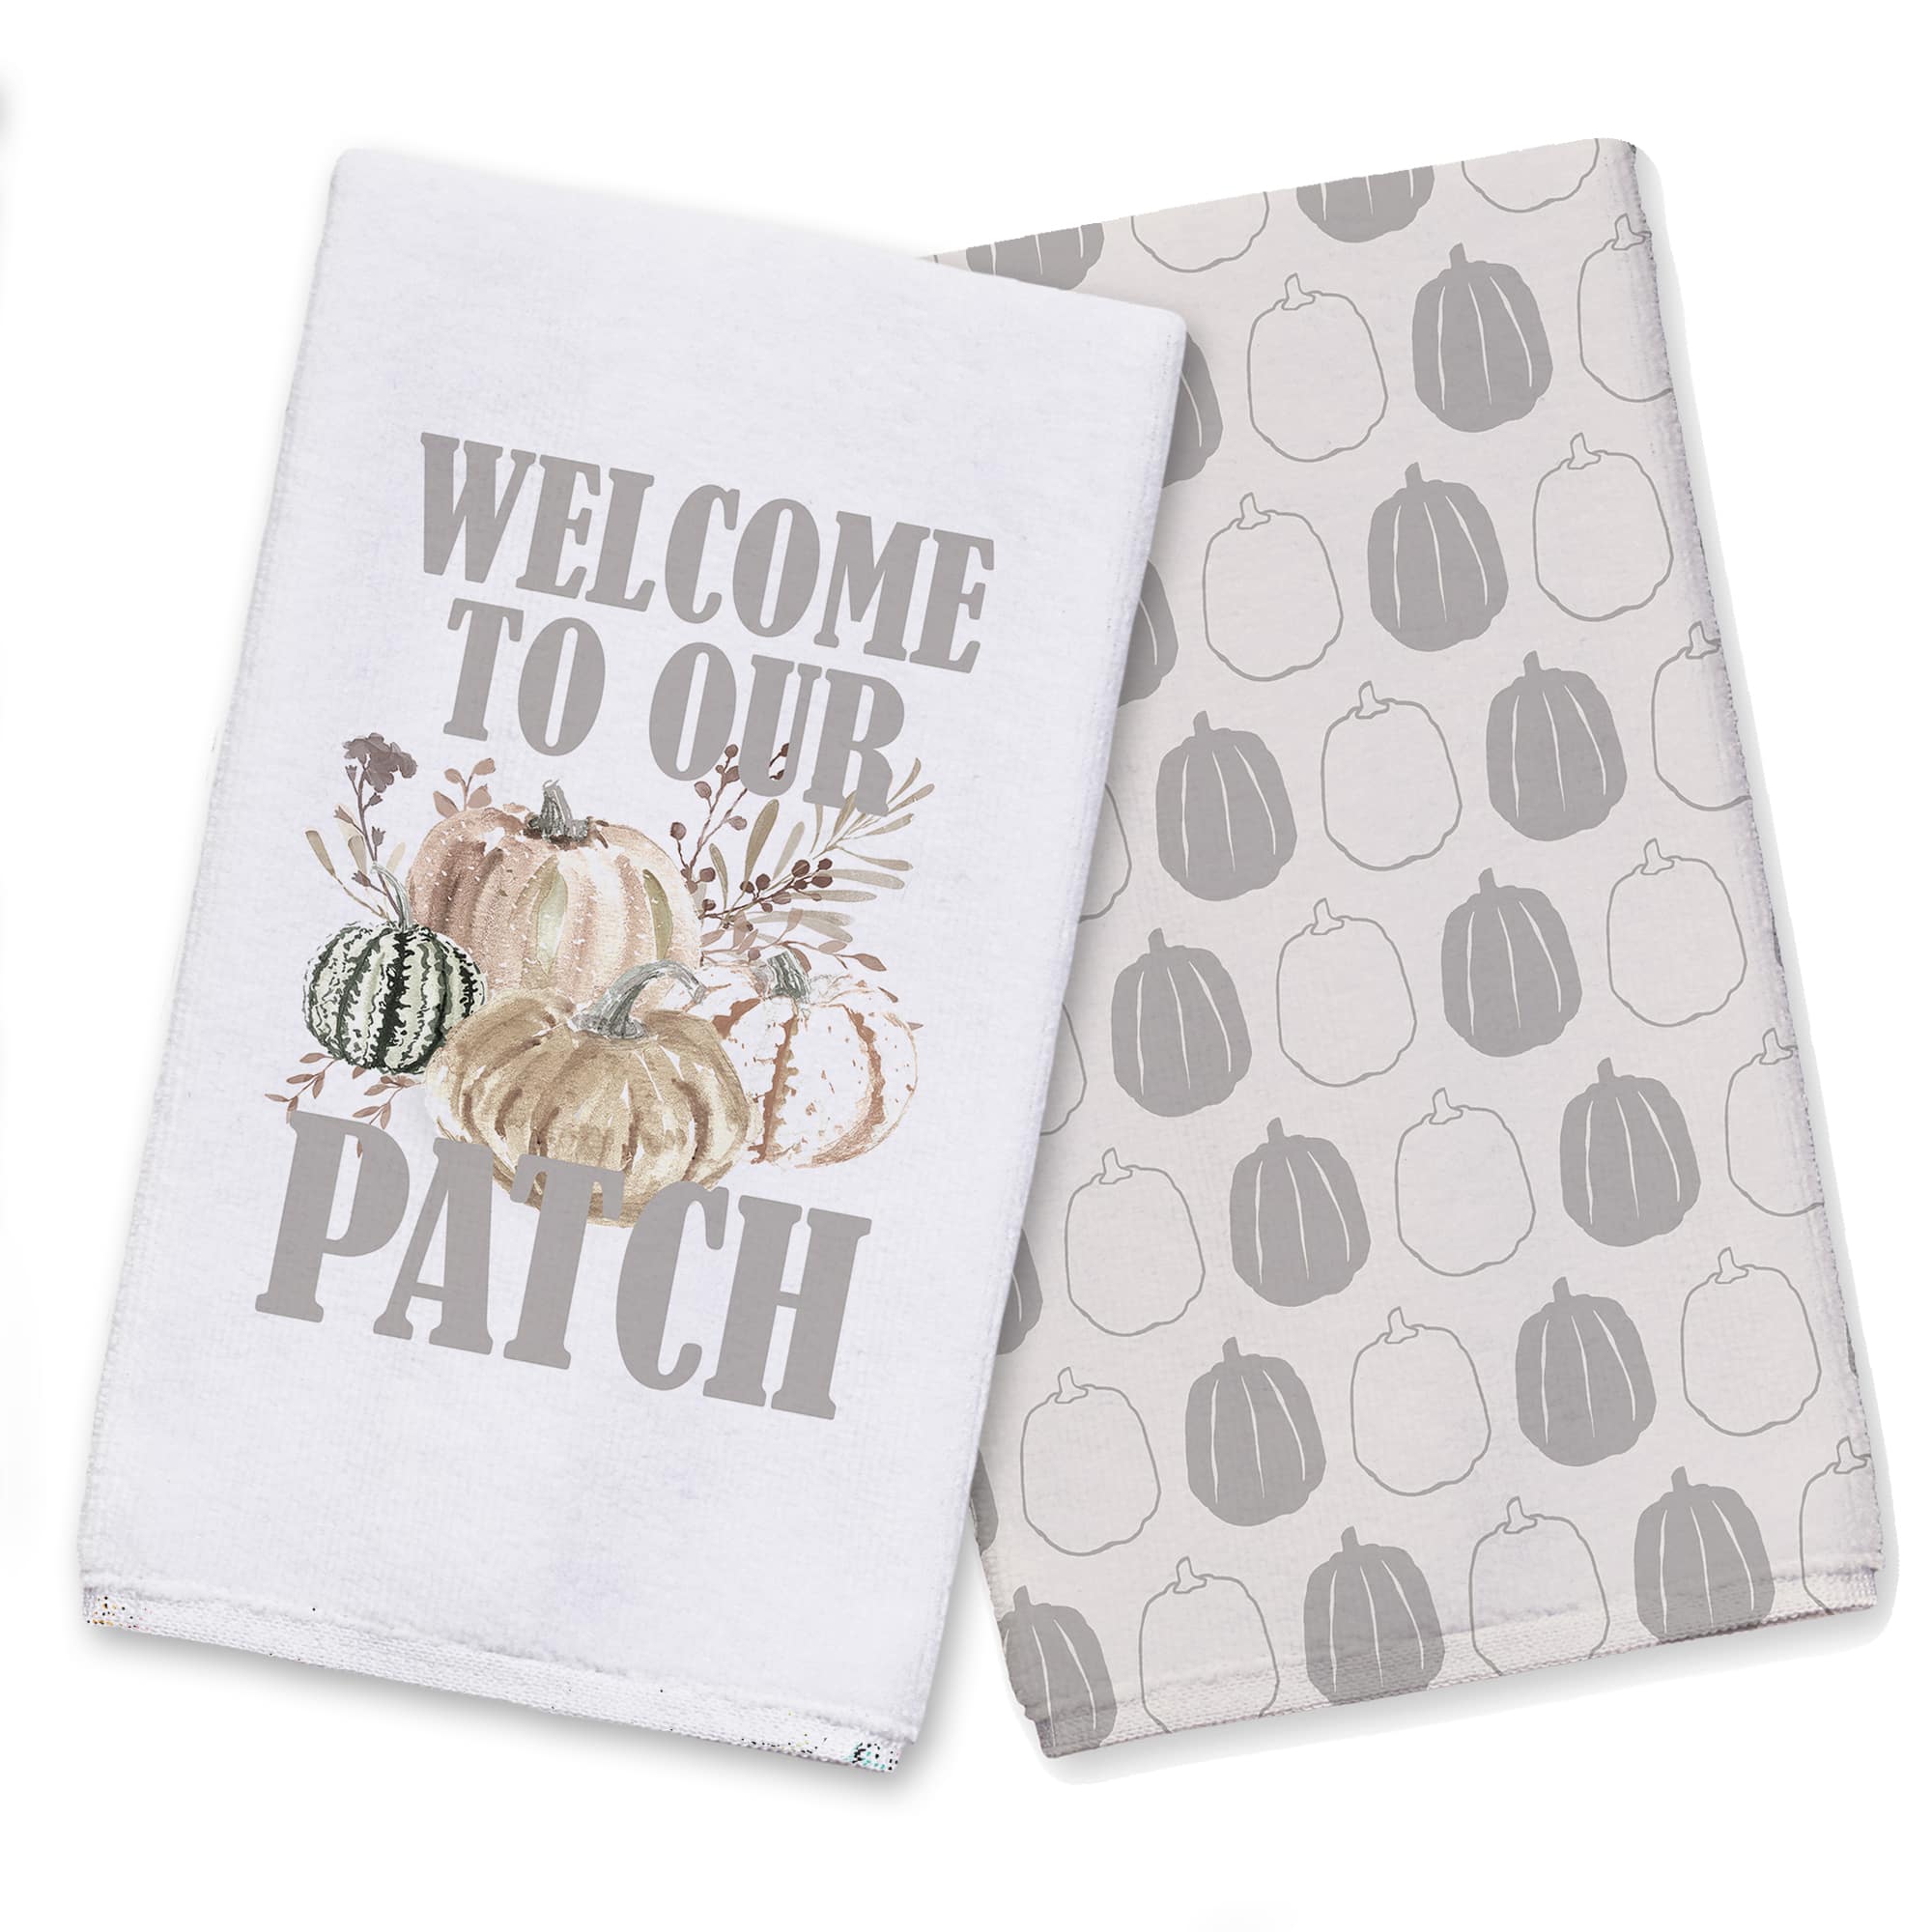 Welcome To Our Patch Tea Towel Set